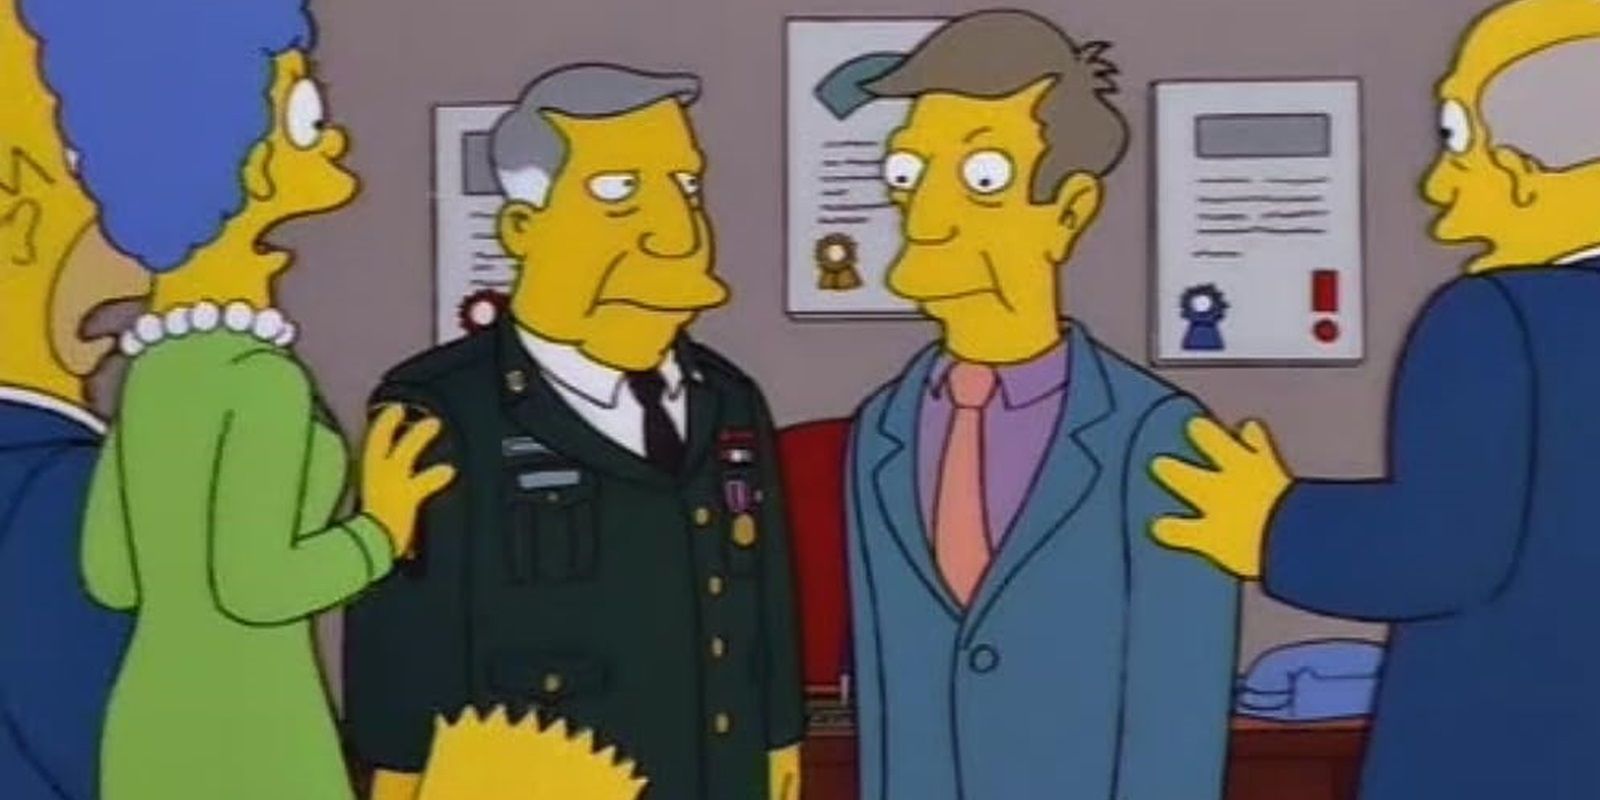 The real Principal Skinner with the impostor Armin Tamzarian in The Simpsons and Marge, Bart, Homer Simpson and Superintendent Chalmers looking shocked